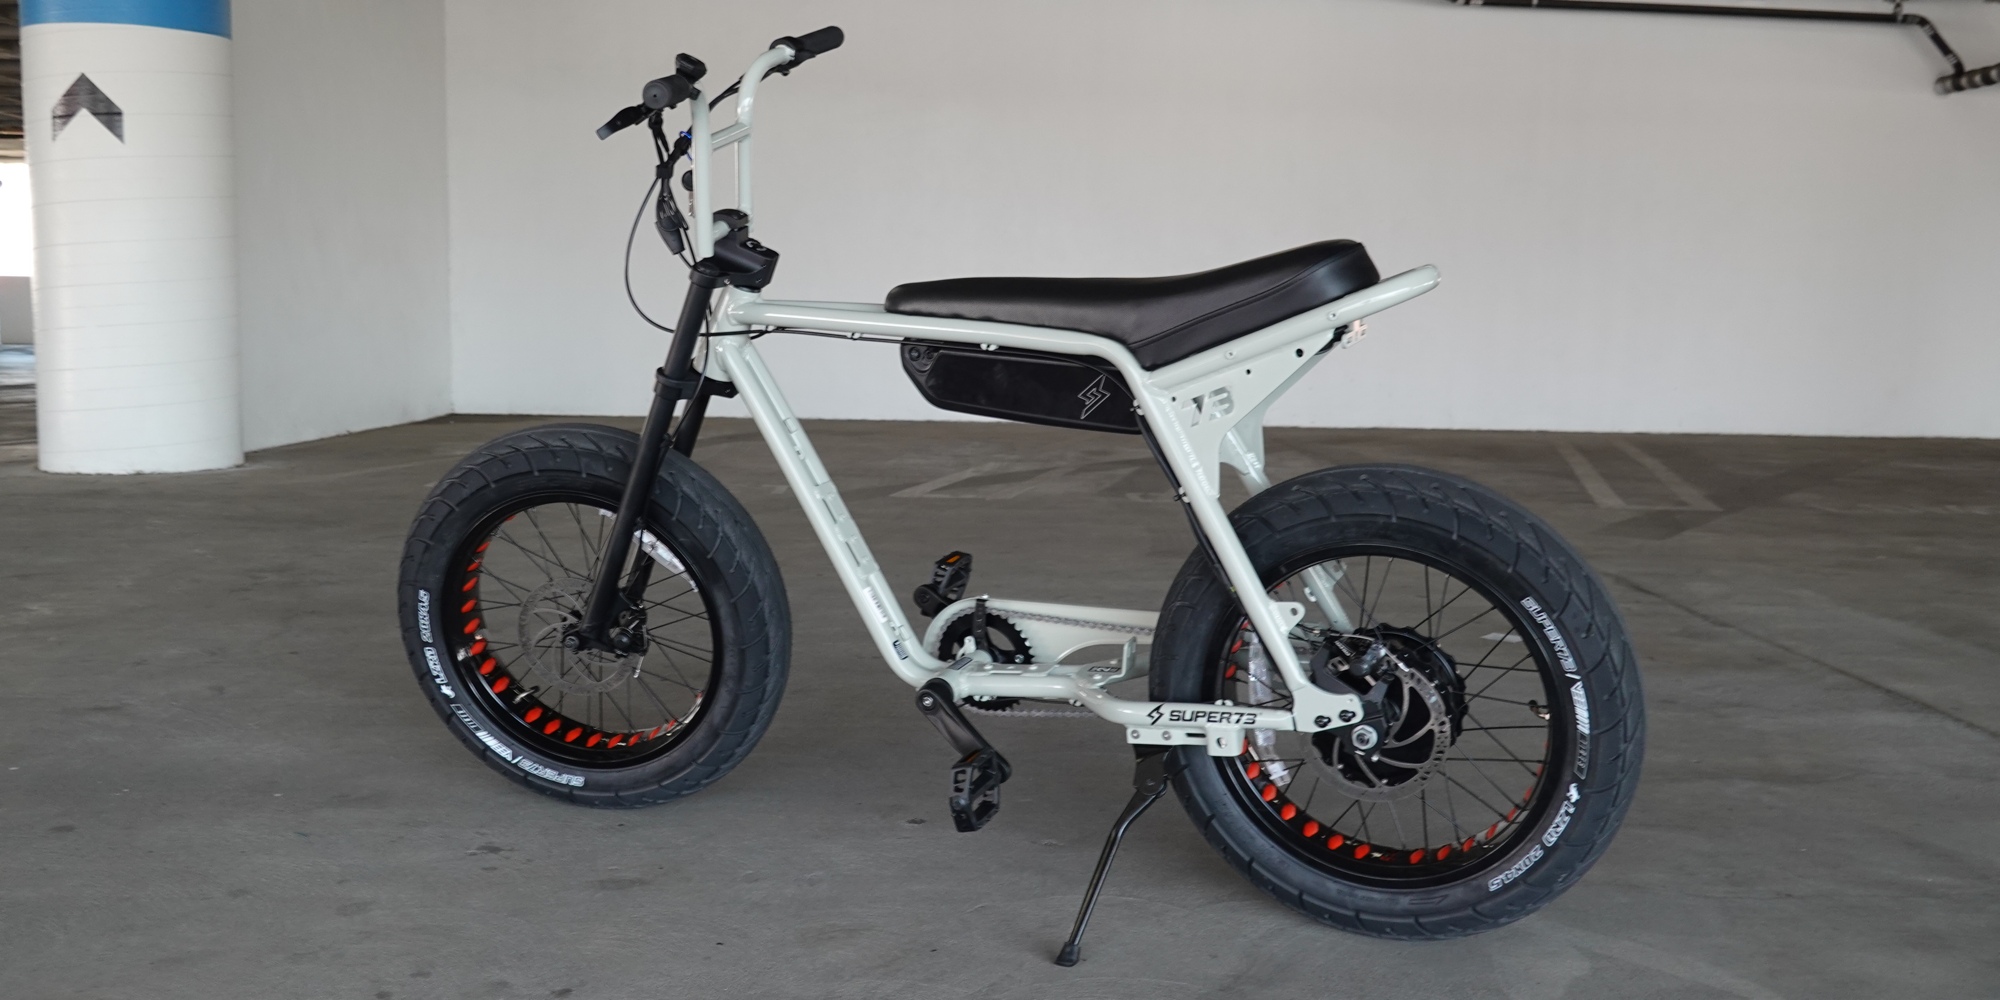 Super73-Z1 moped-style electric bike first ride: Nails both